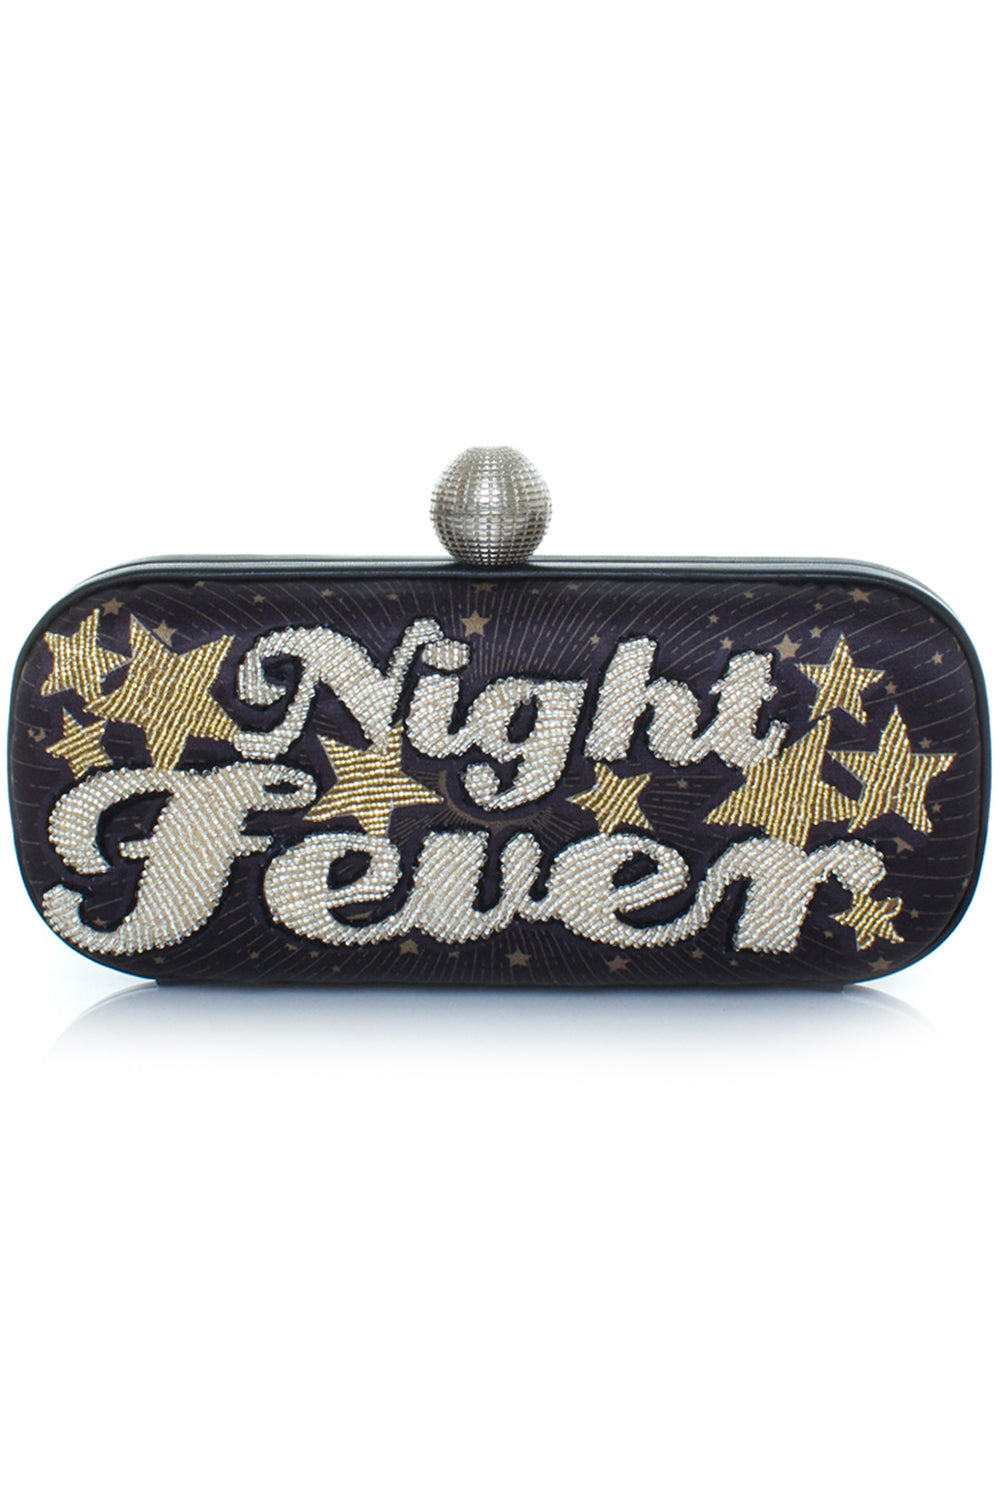 SOLD OUT: Night Fever Rays Big Box